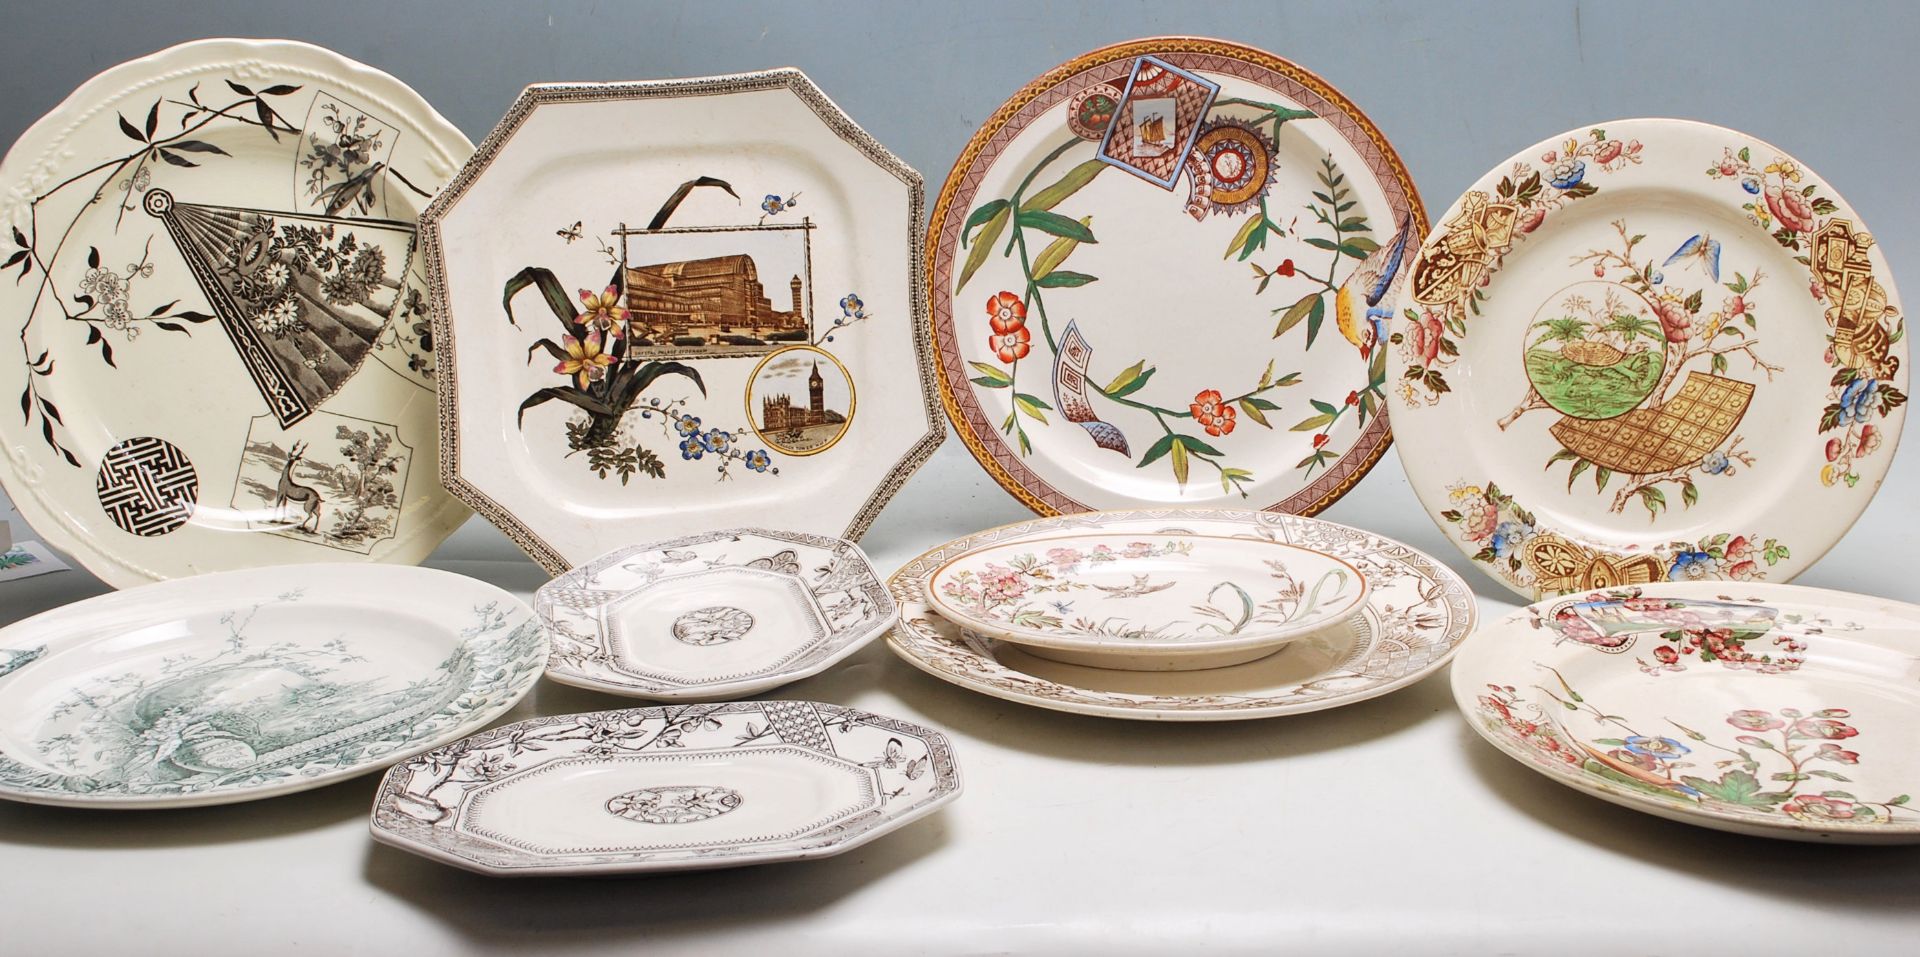 COLECTION OF VICTORIAN AESTHETIC MOVEMENT PLATES